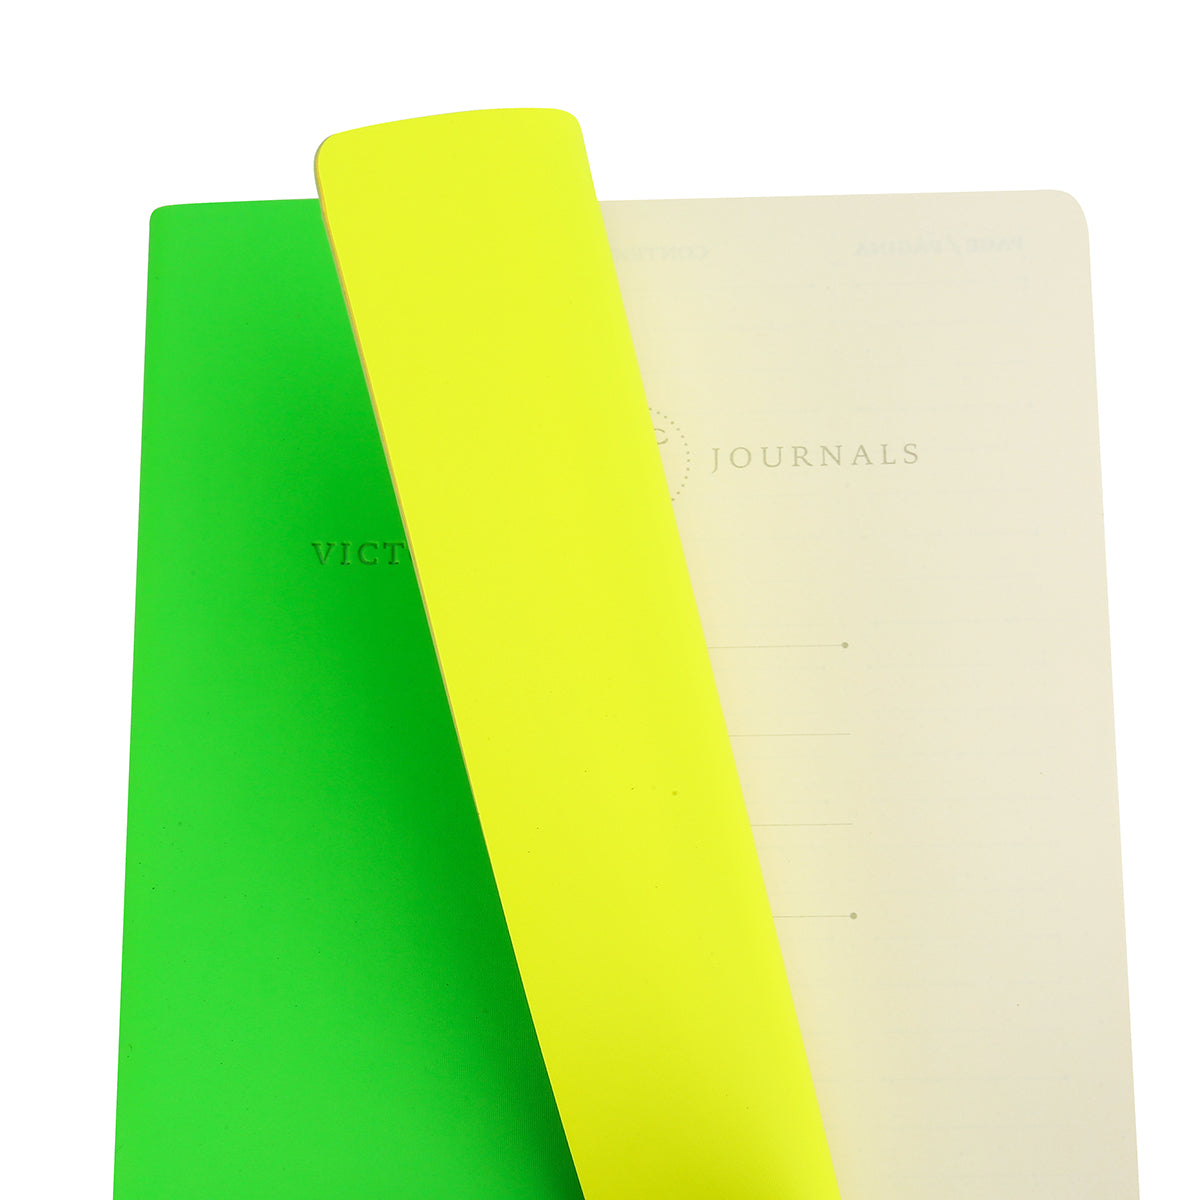 Victoria's Journals Neon Dotted Bullet Journal, Flexy Leatherette Cover, 96pages, 80 gsm (Neon Green)